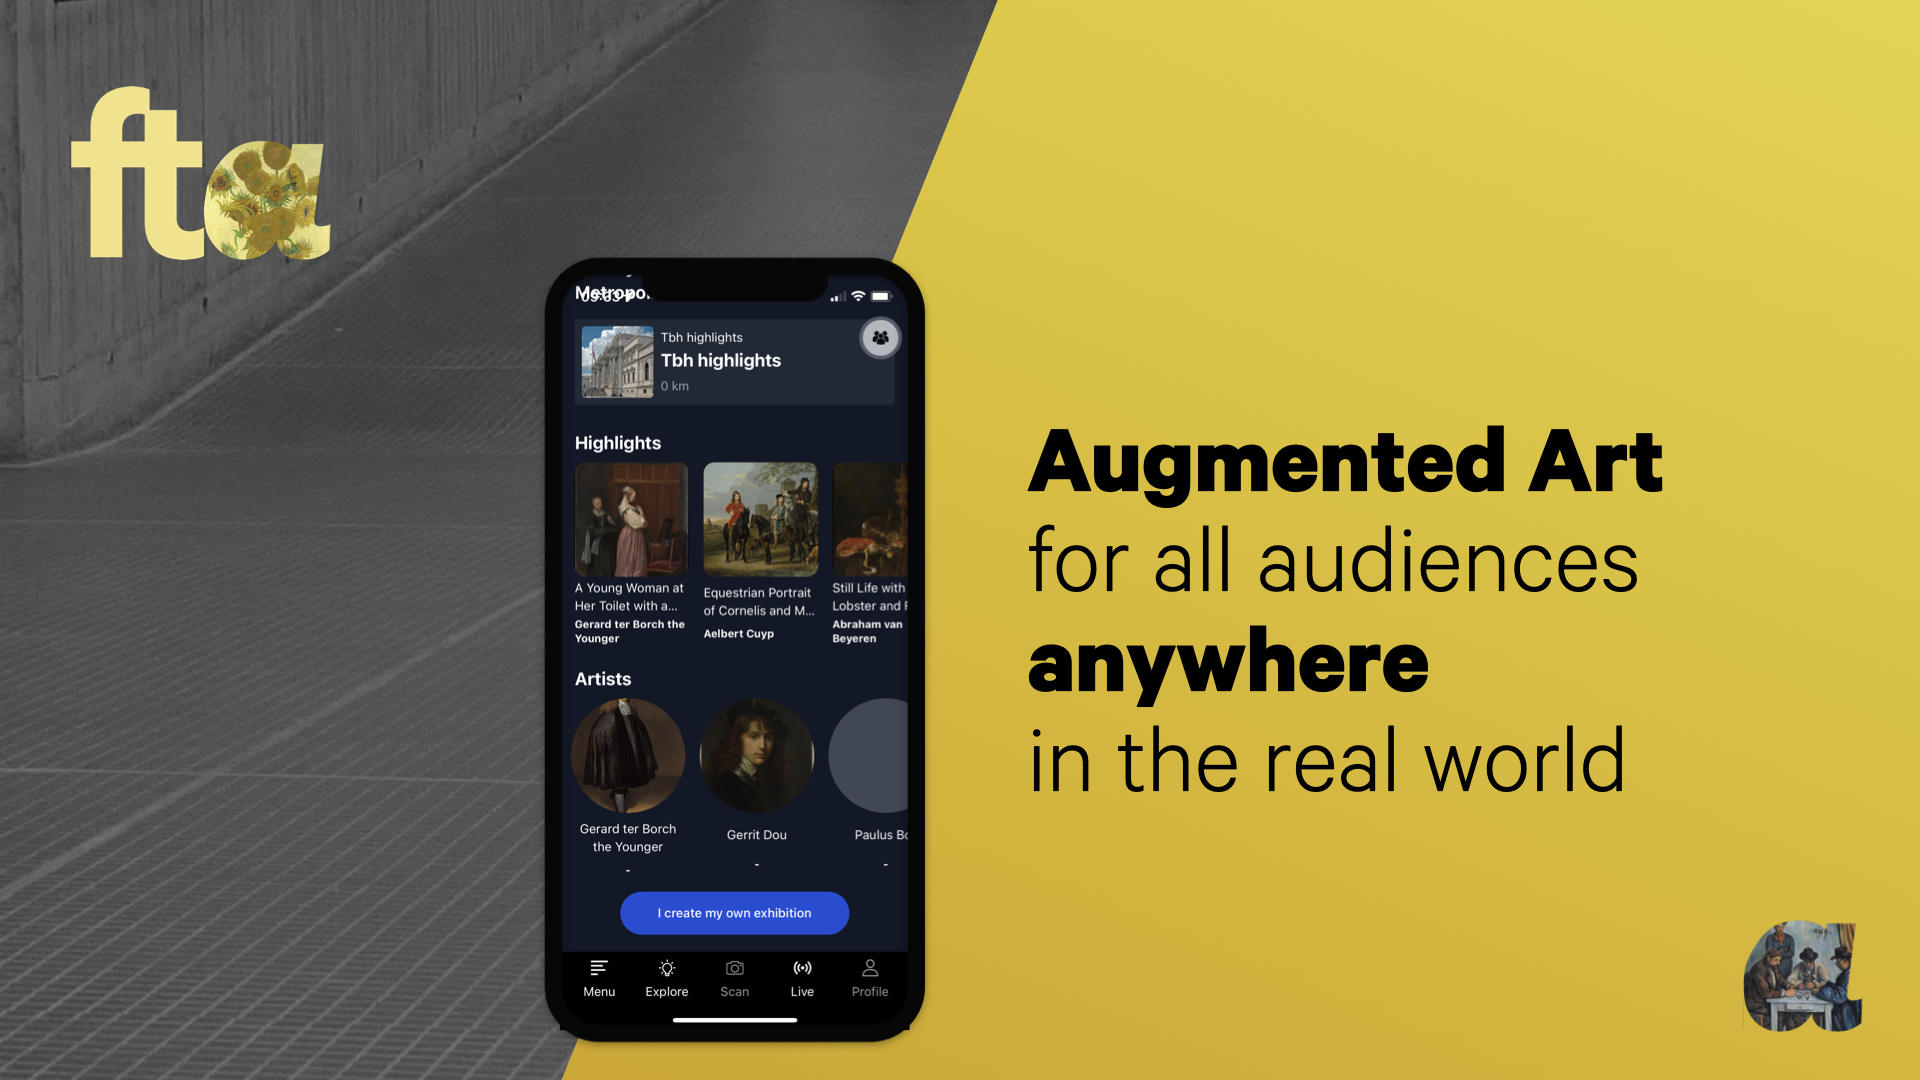 Augmented Art for all audiences anywhere in the real world